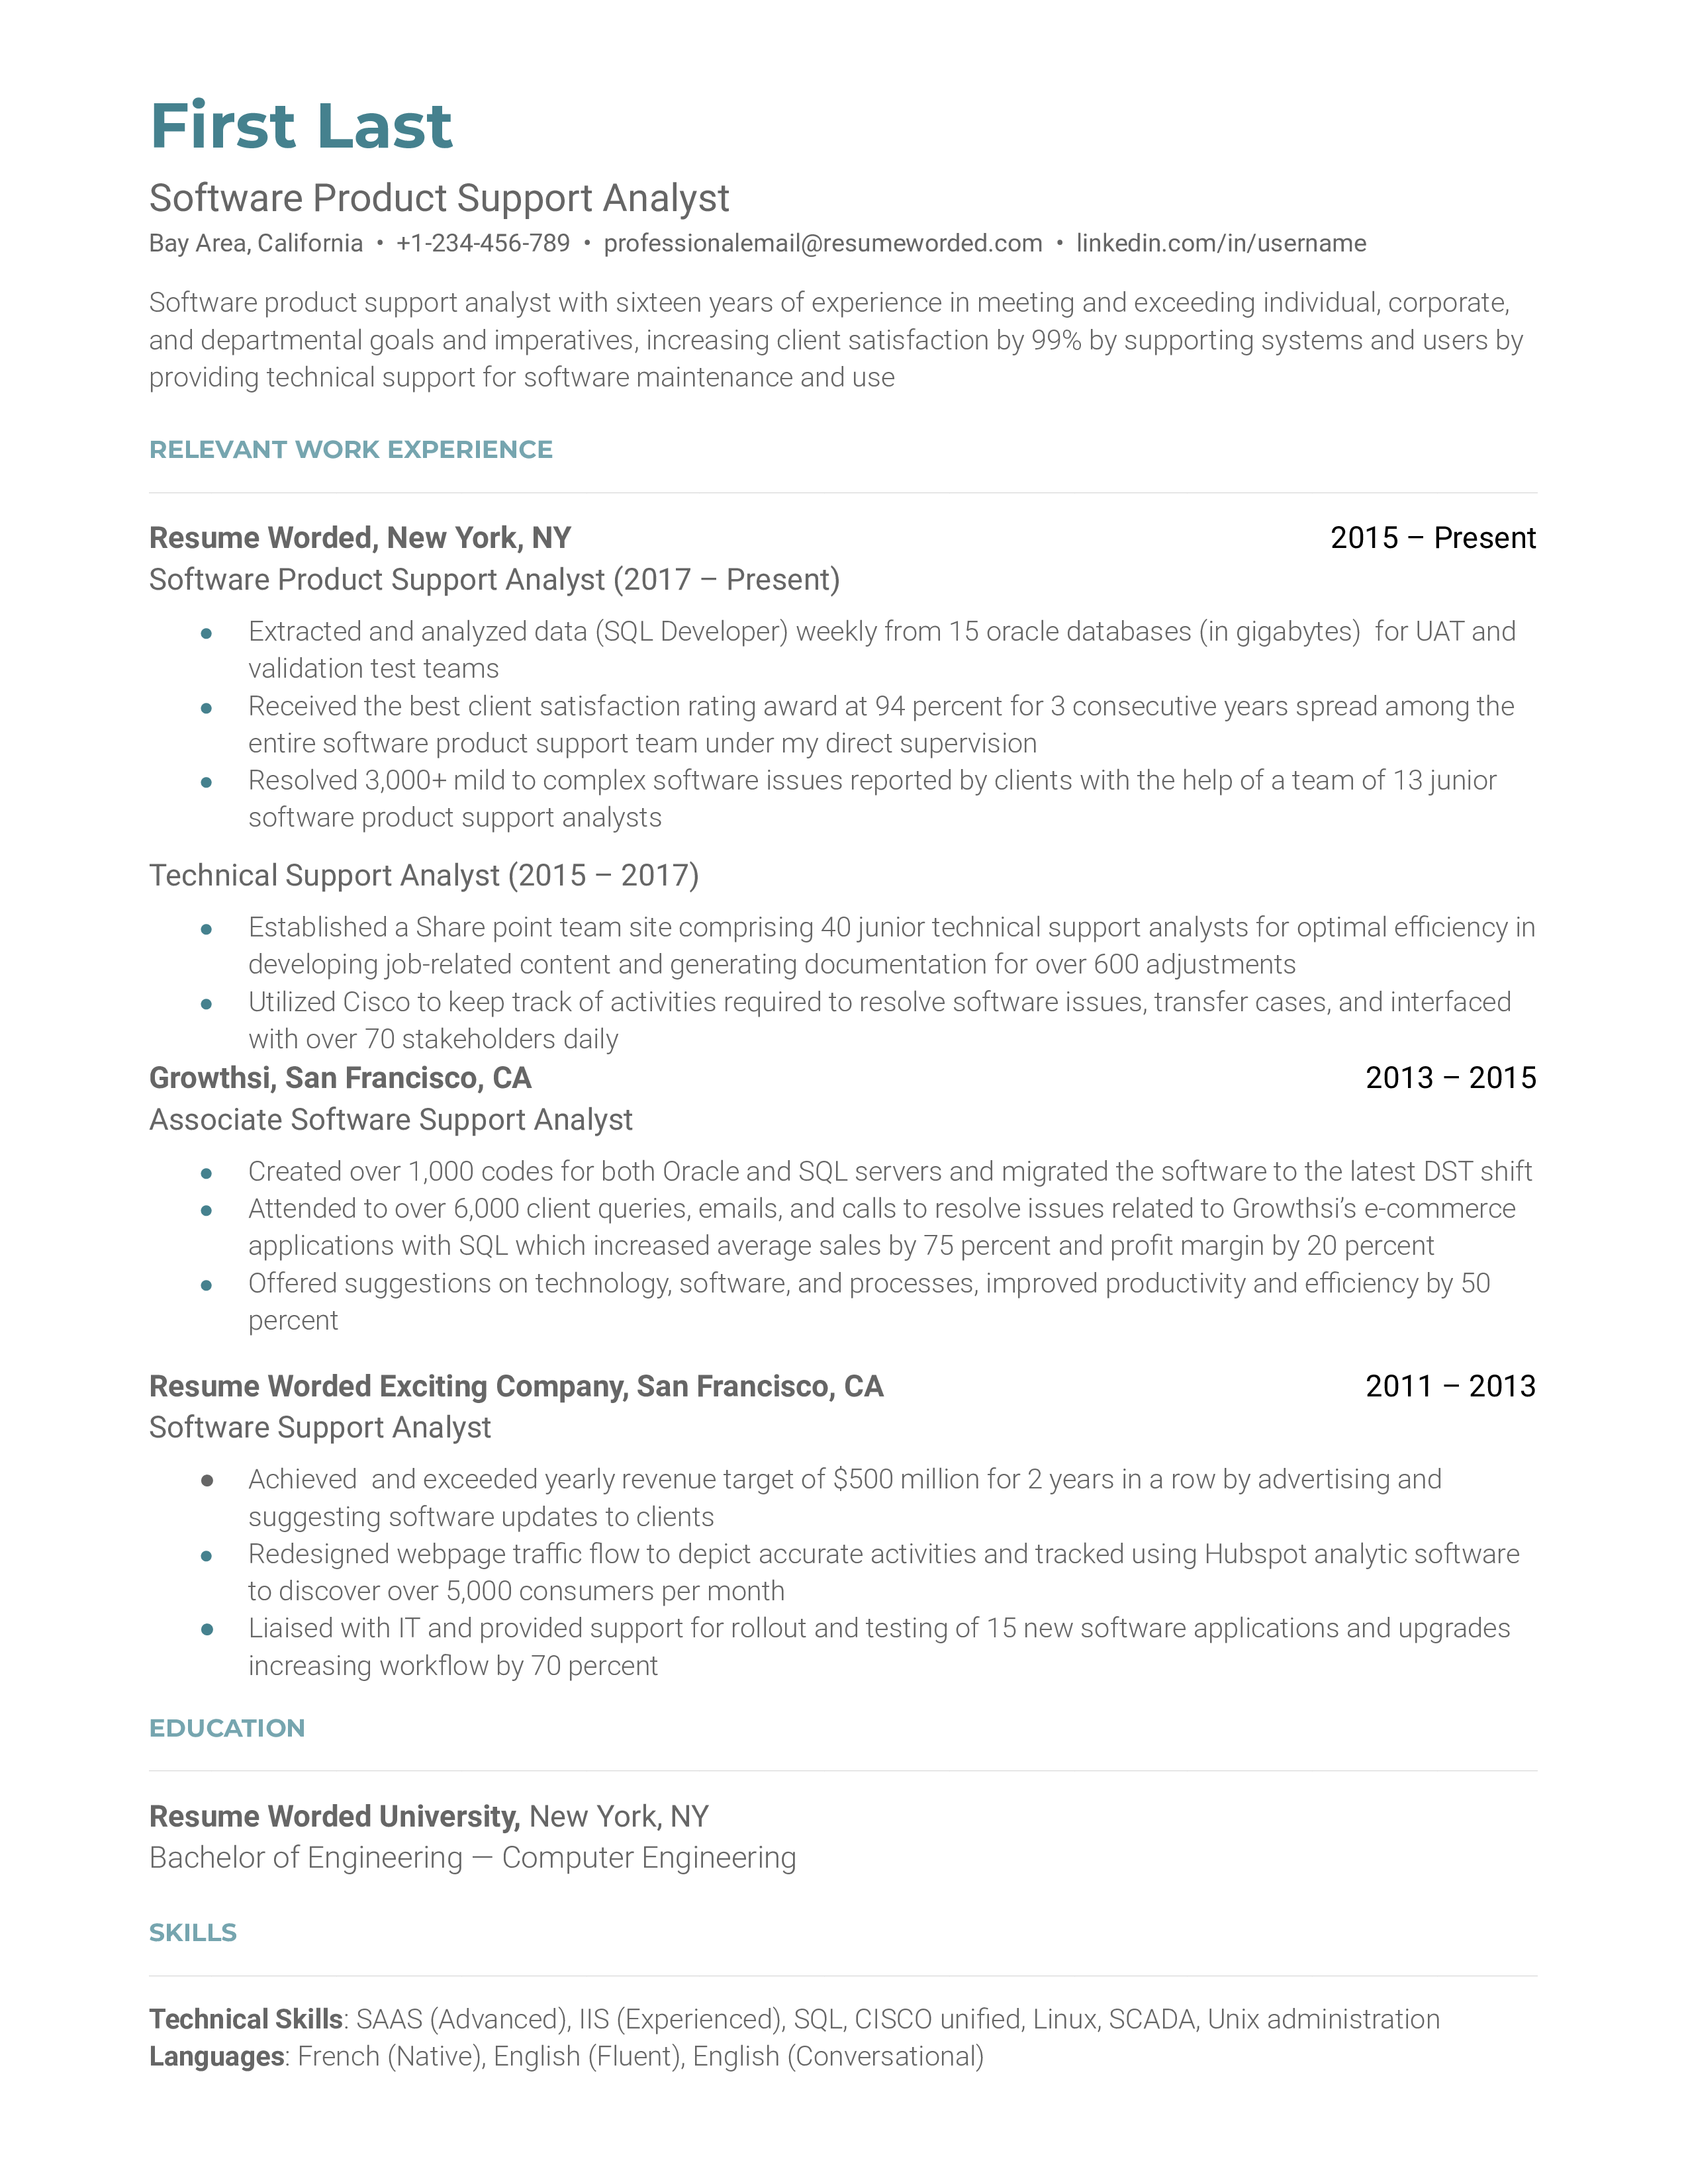 Software Product Support Analyst Resume Template + Example